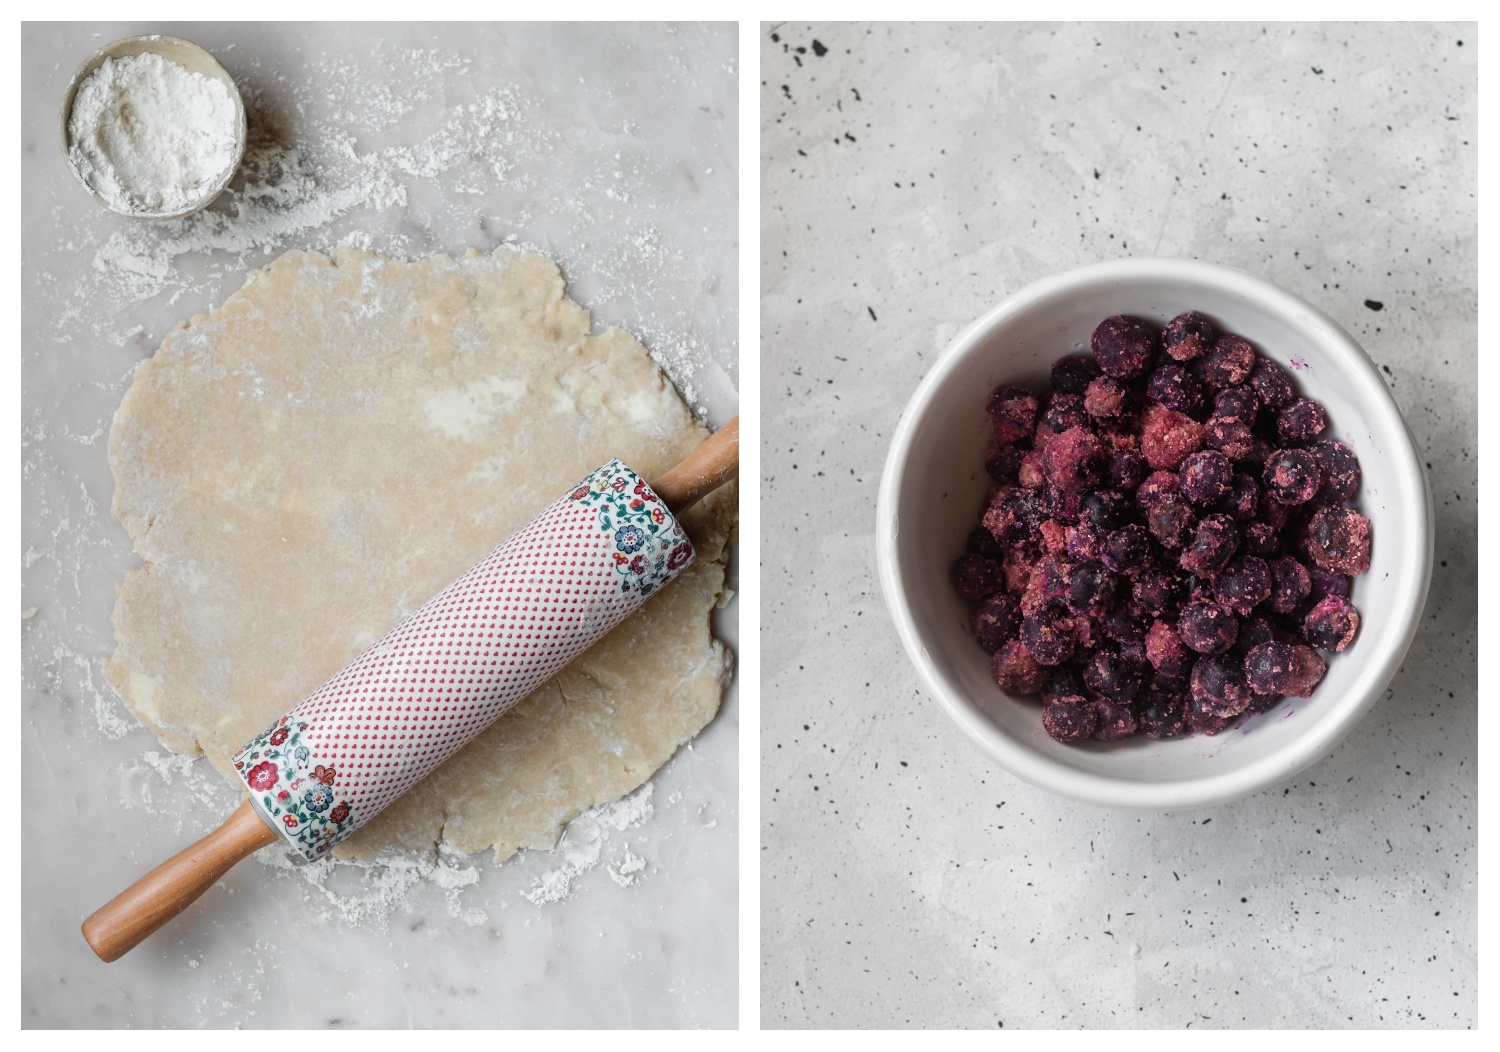 Two overhead shots; on the left, rolled out pie dough on a marble board next to a ceramic rolling pin and small bowl of flour. On the right, a white bowl filled with blueberries on a grey table.